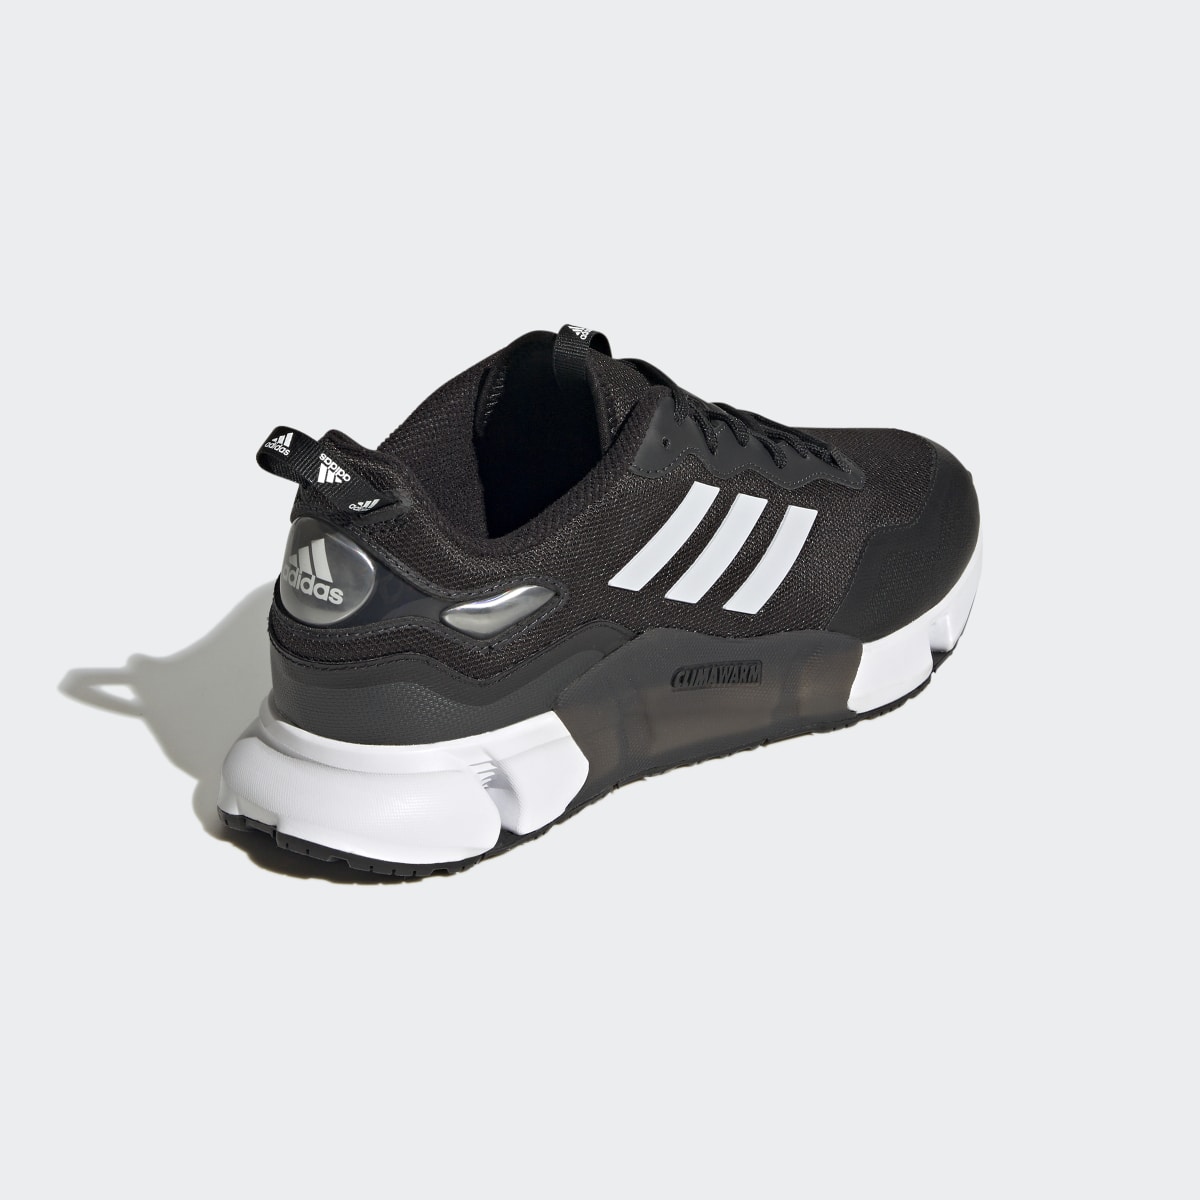 Adidas Chaussure Climawarm. 9